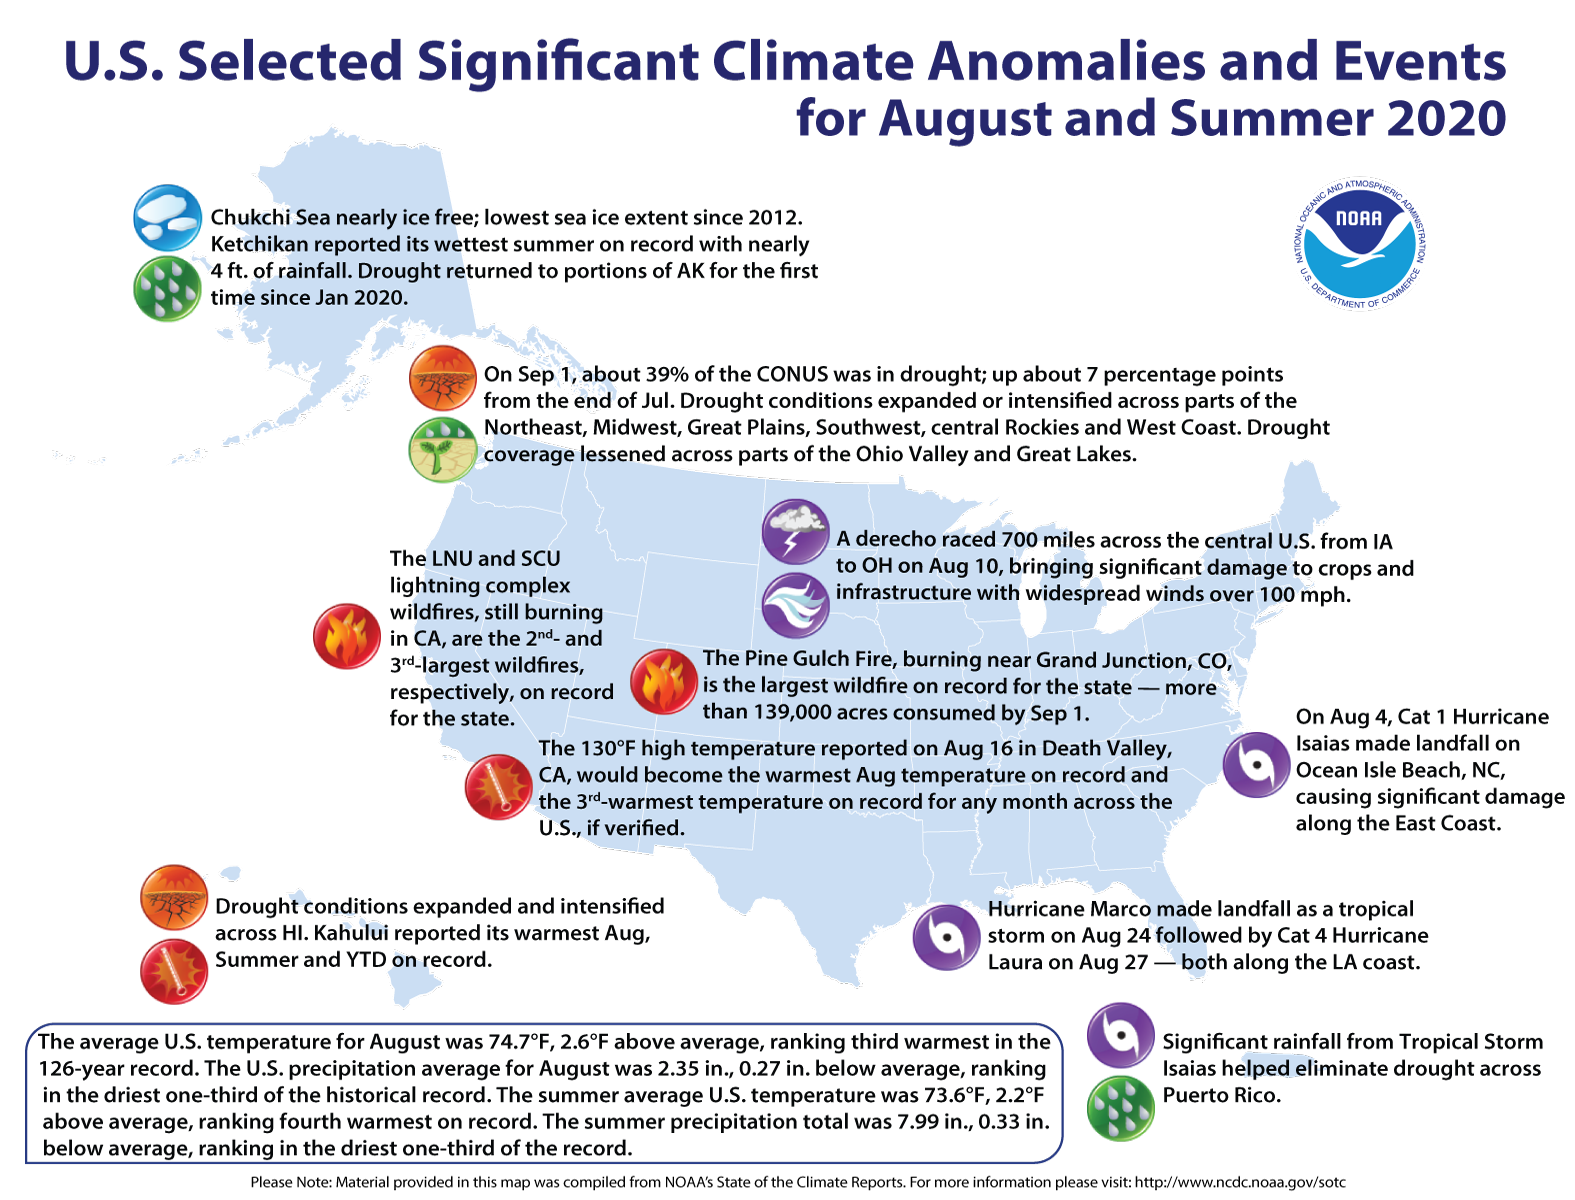 An annotated map of the United States showing notable climate and weather events that occurred across the country during August and Summer 2020. For text details, please visit http://bit.ly/USClimate202008.